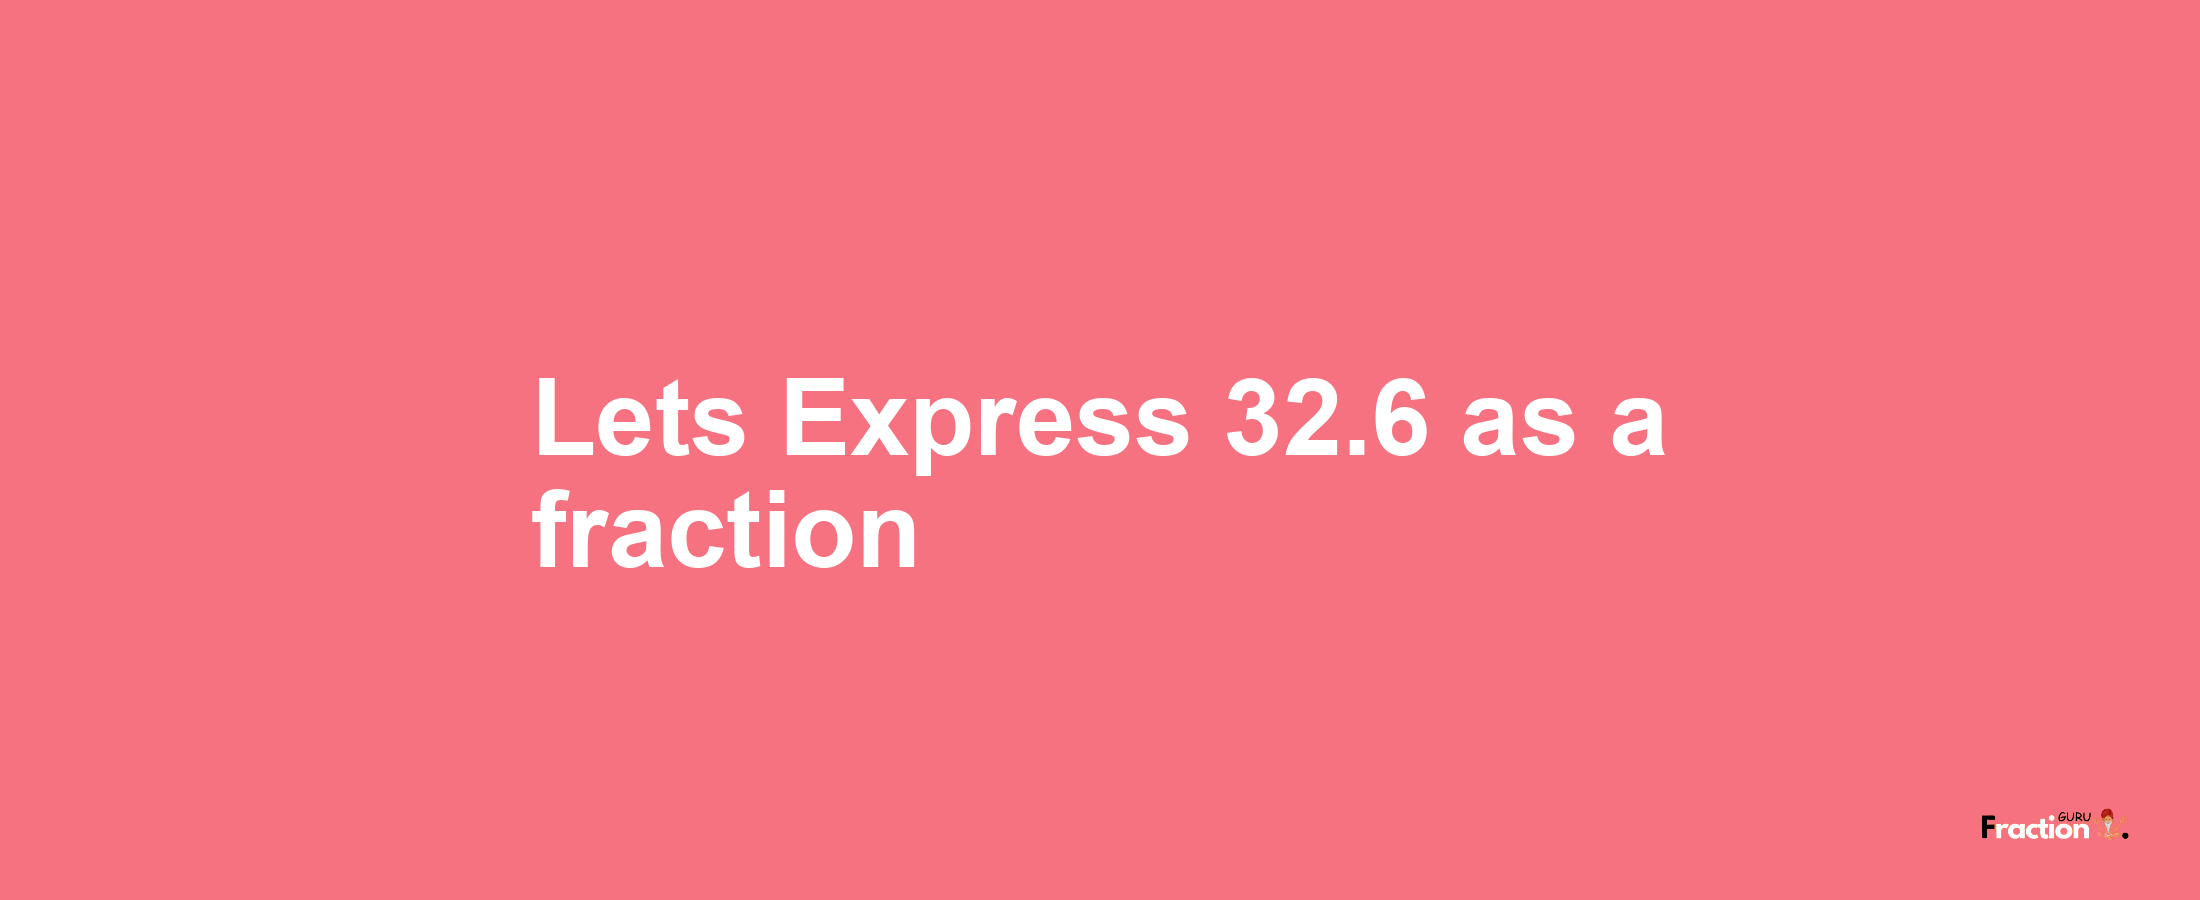 Lets Express 32.6 as afraction